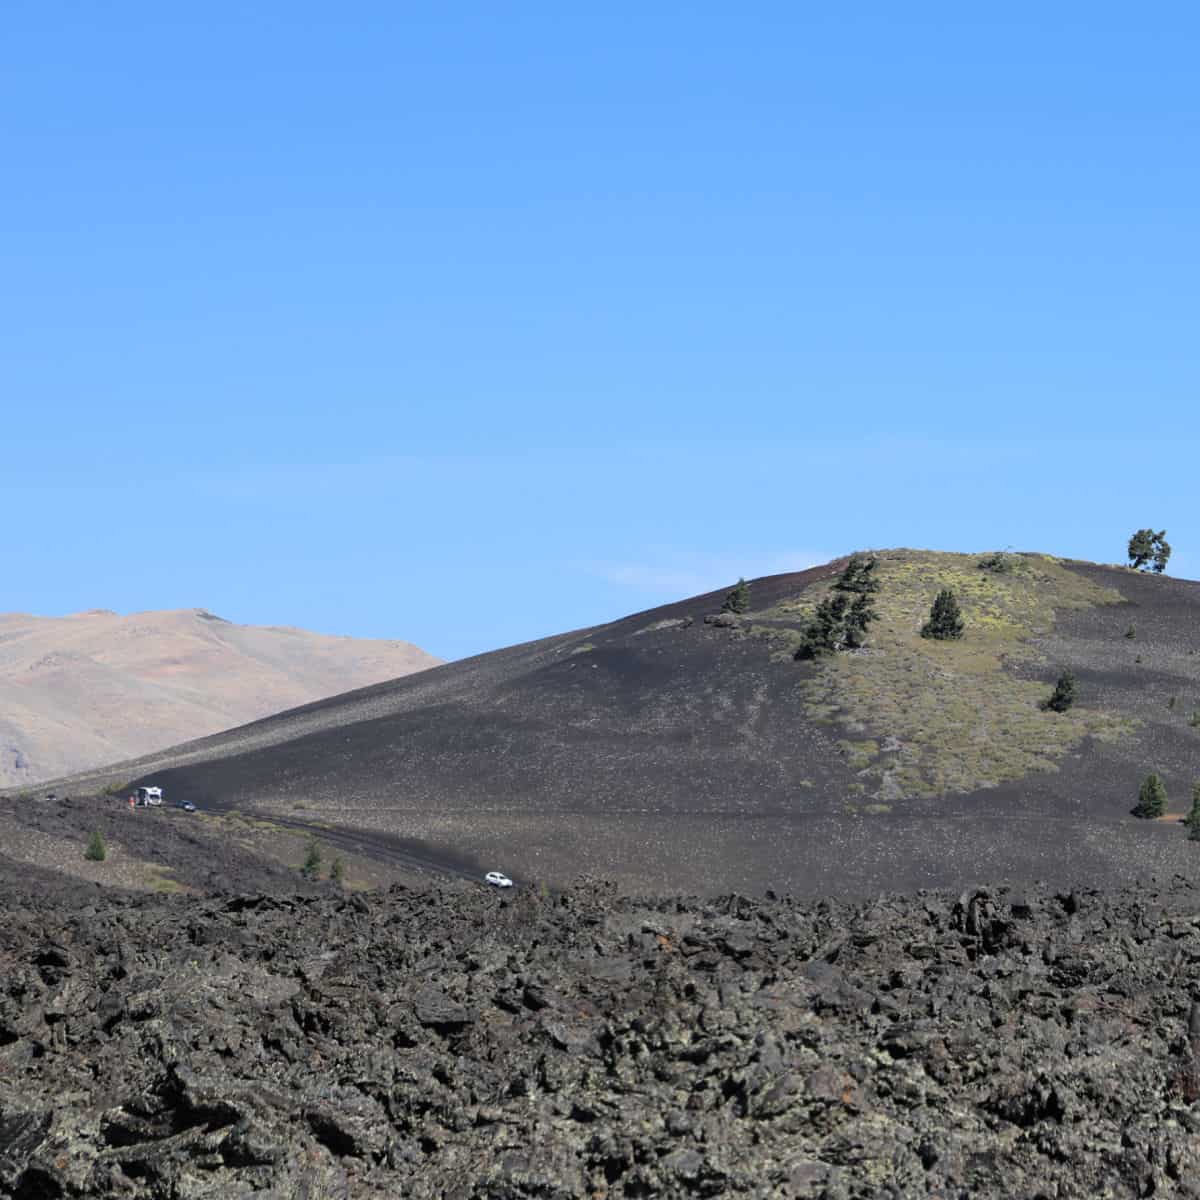 Driving at Craters of the Moon National Monument and Preserve